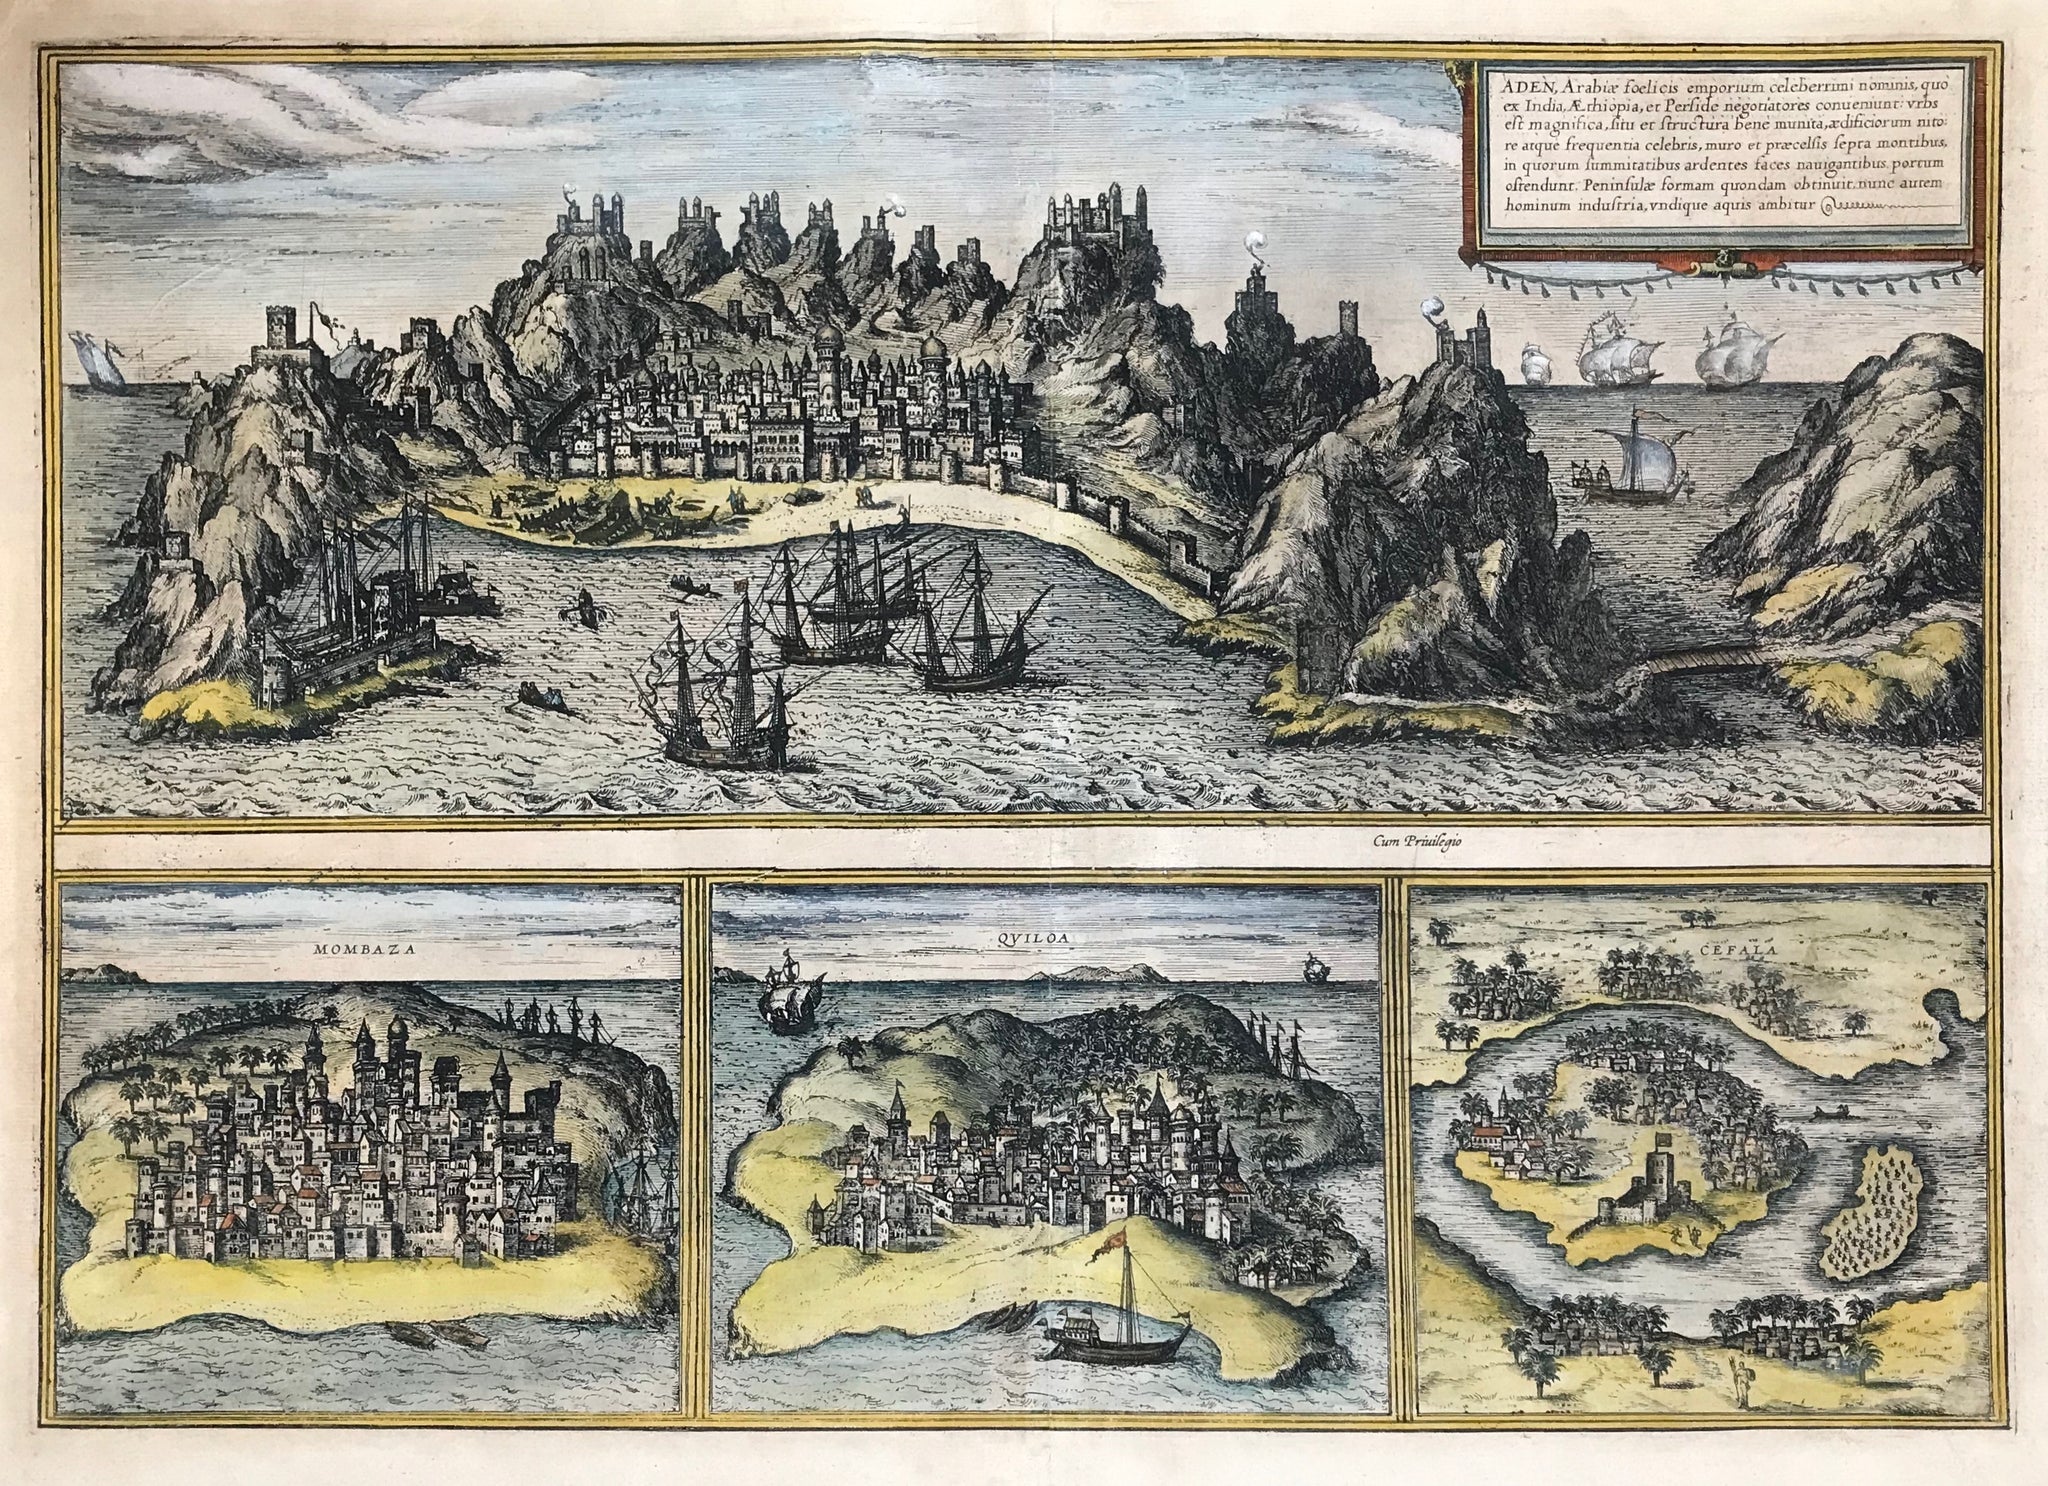 By Georg Braun (1540-1622) and Frans Hogenberg (1535-1590)  Cologne, 1572  The most prominent panoramic view of the city of Aden in Yemen in Arabia and three views of Africa's East Coast in the 16th century.  Mombaza (Mombasa in Kenya)  Quiloa (near Kilwa Kisiwani)  Cefala (Sofala in Mozambique)